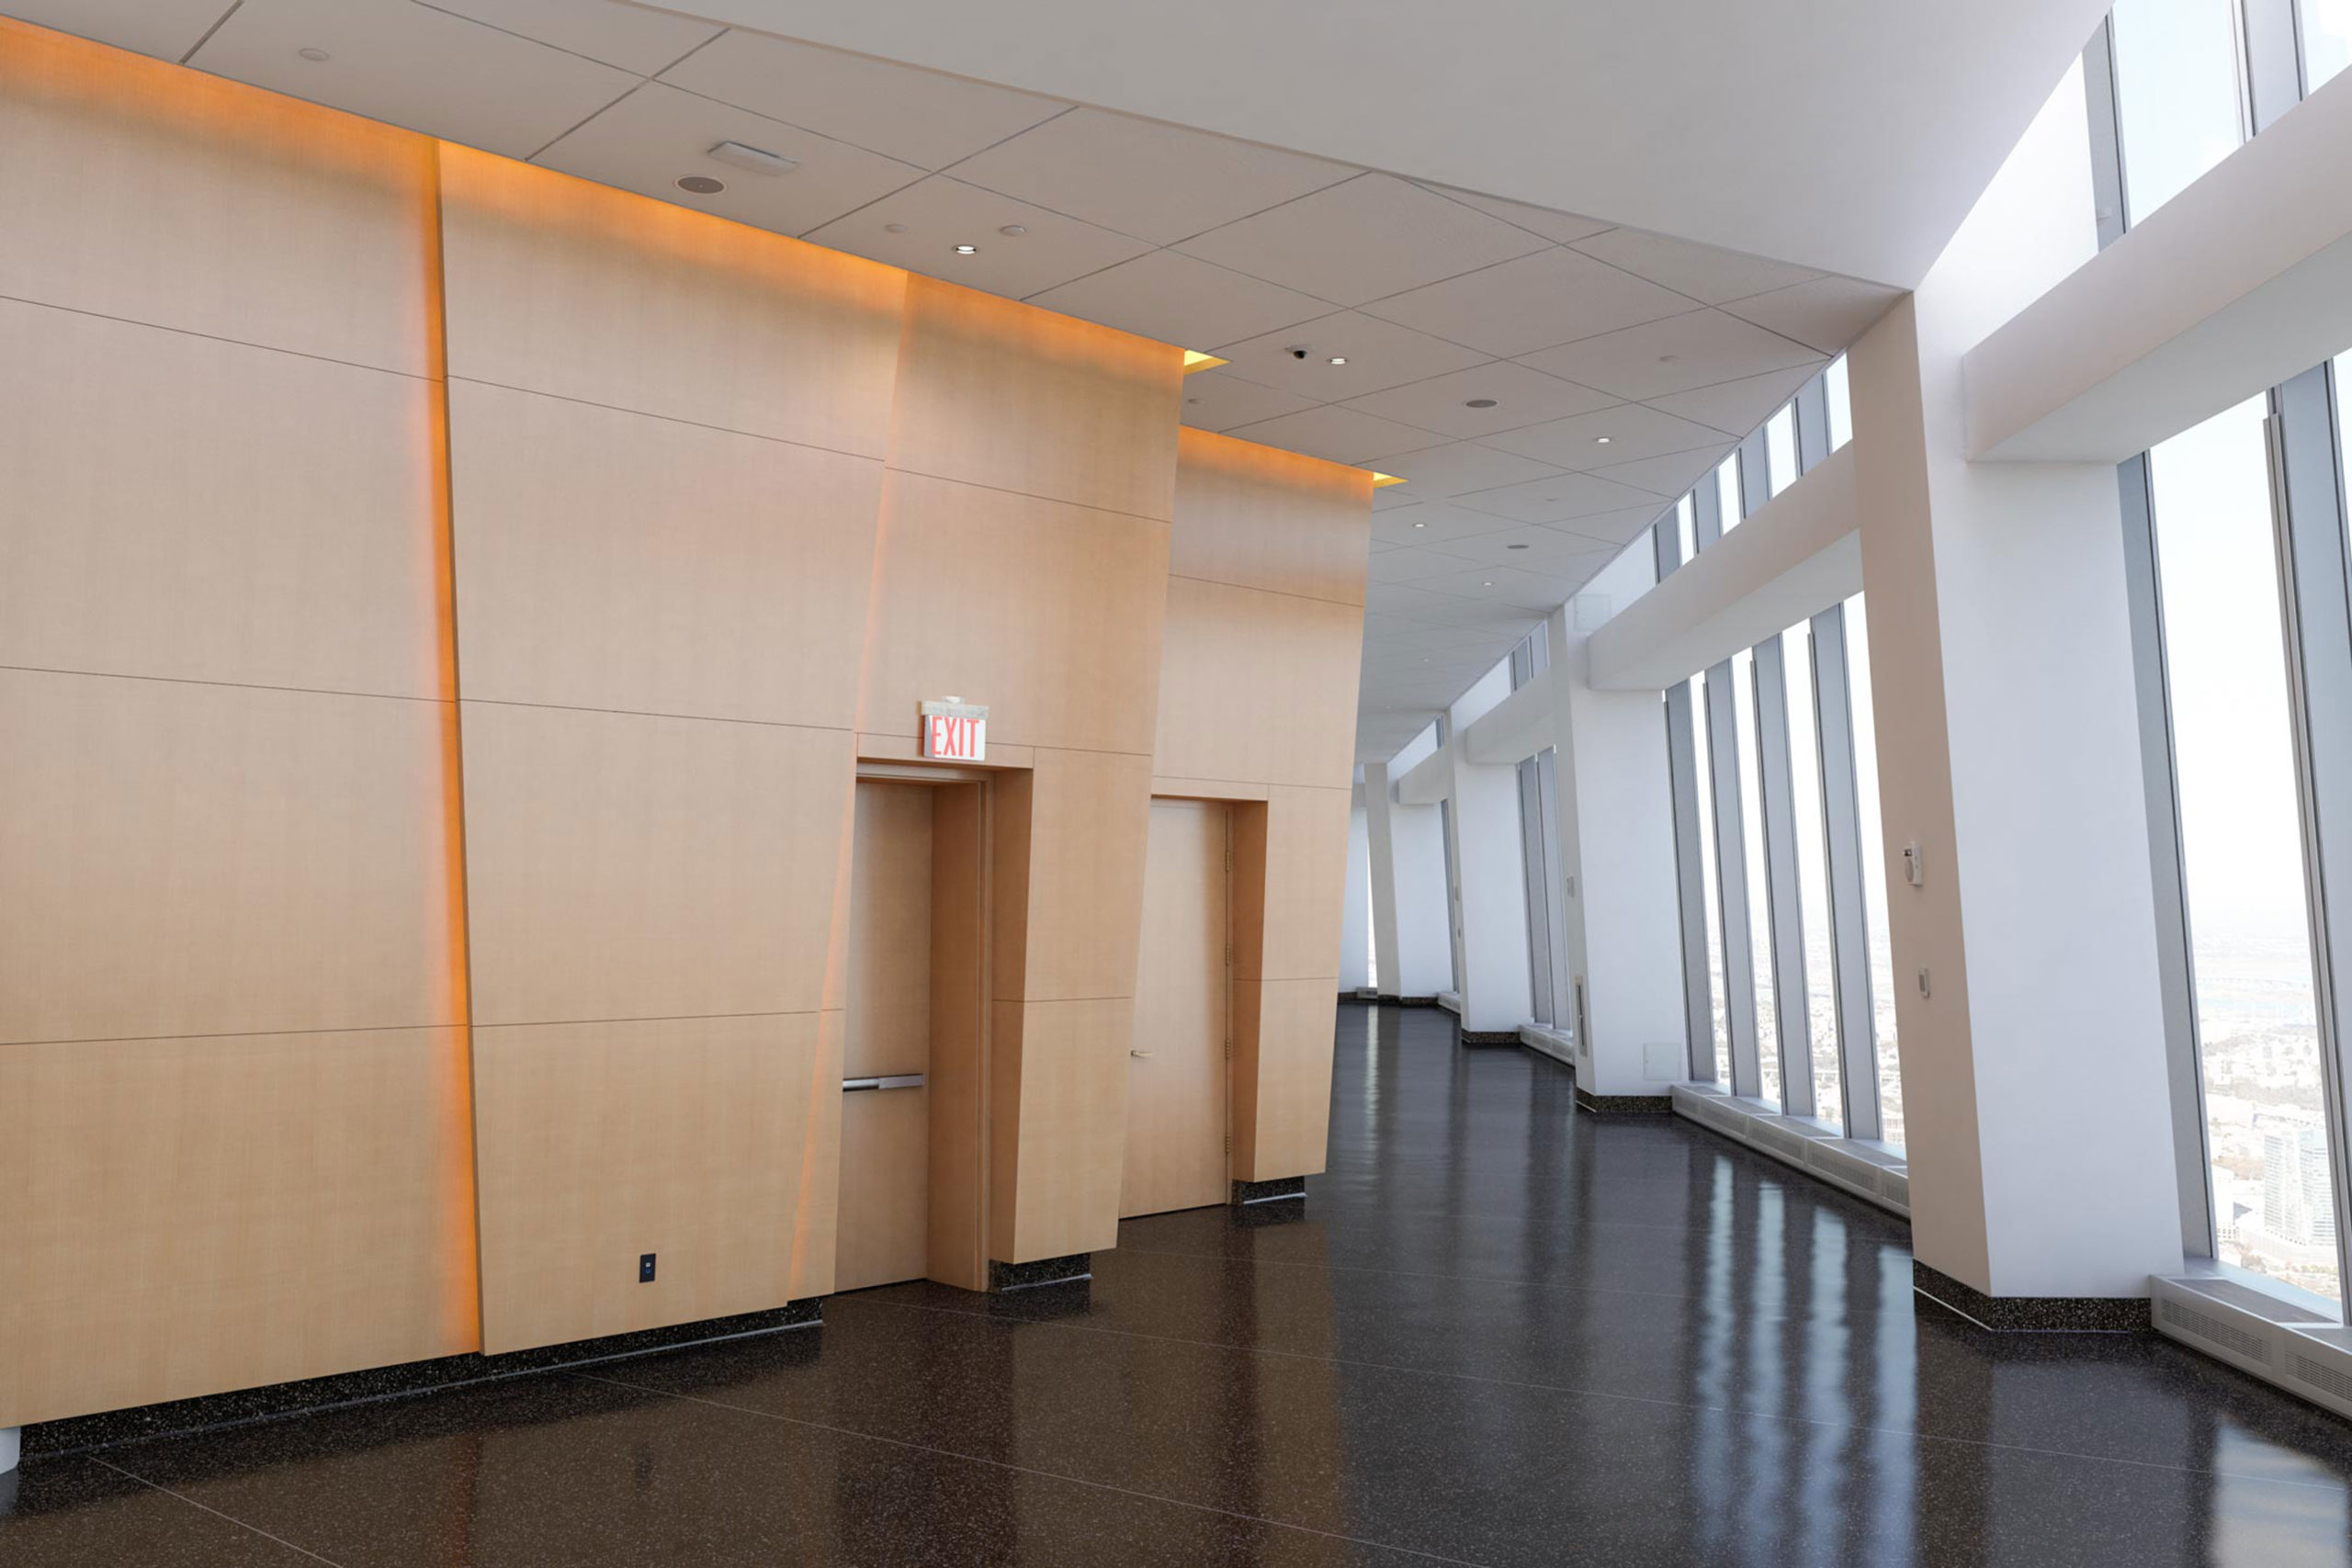 Wood acoustic wall panels in One World Observatory.